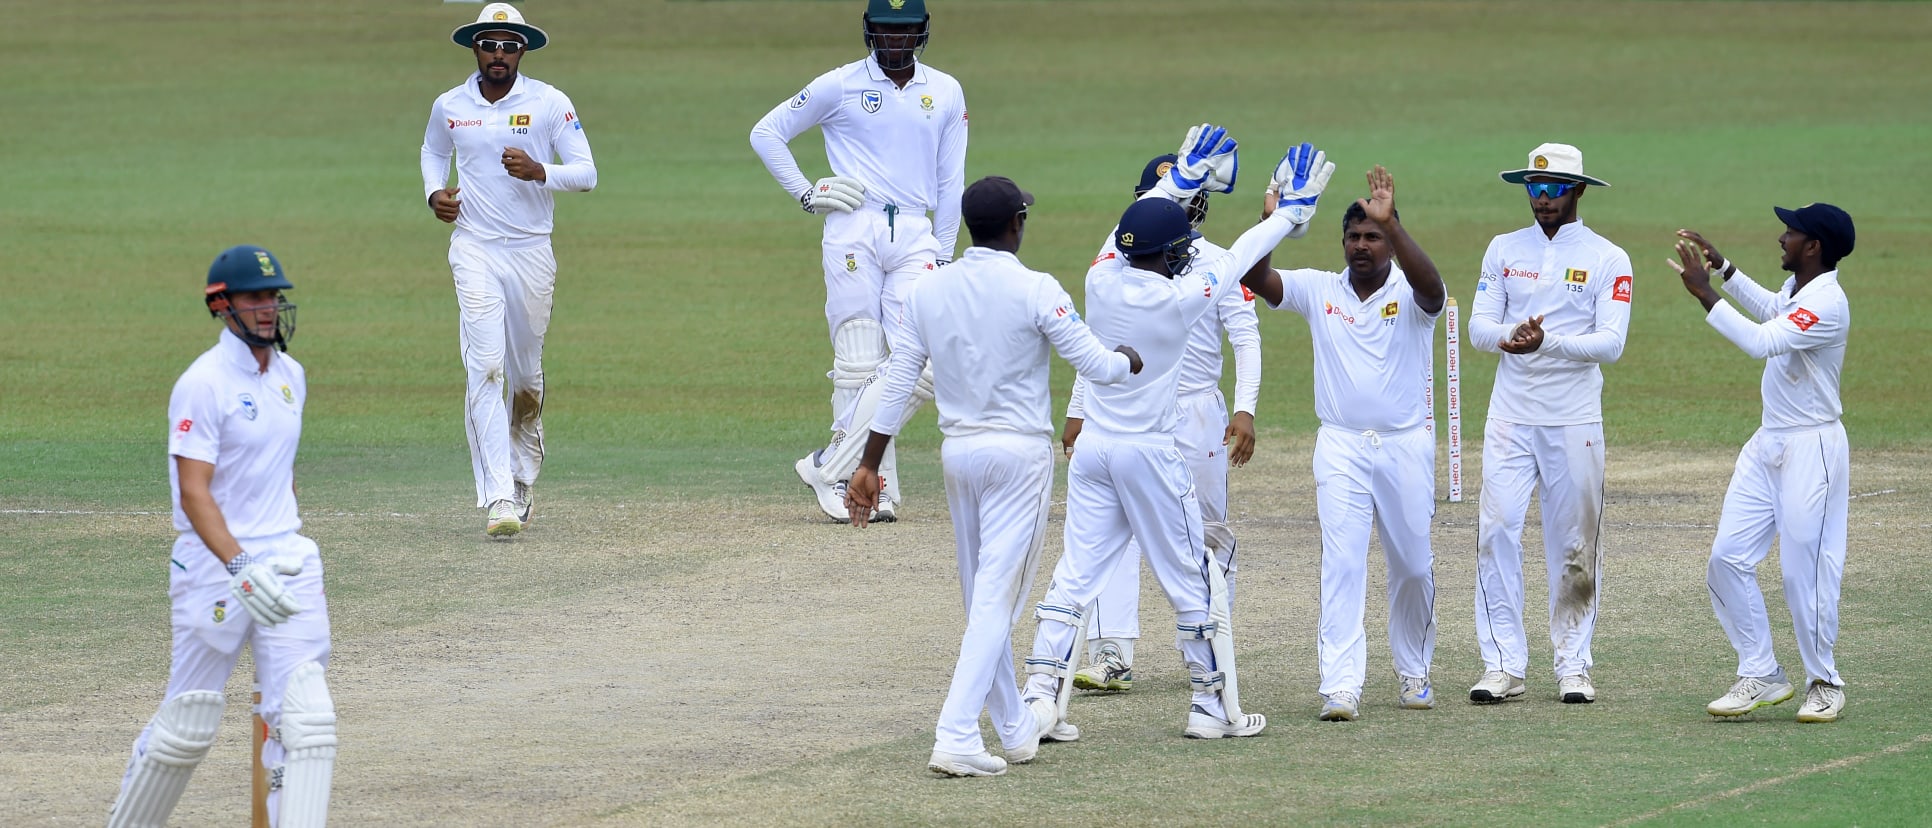 Even at 40, Herath was remarkably persistent